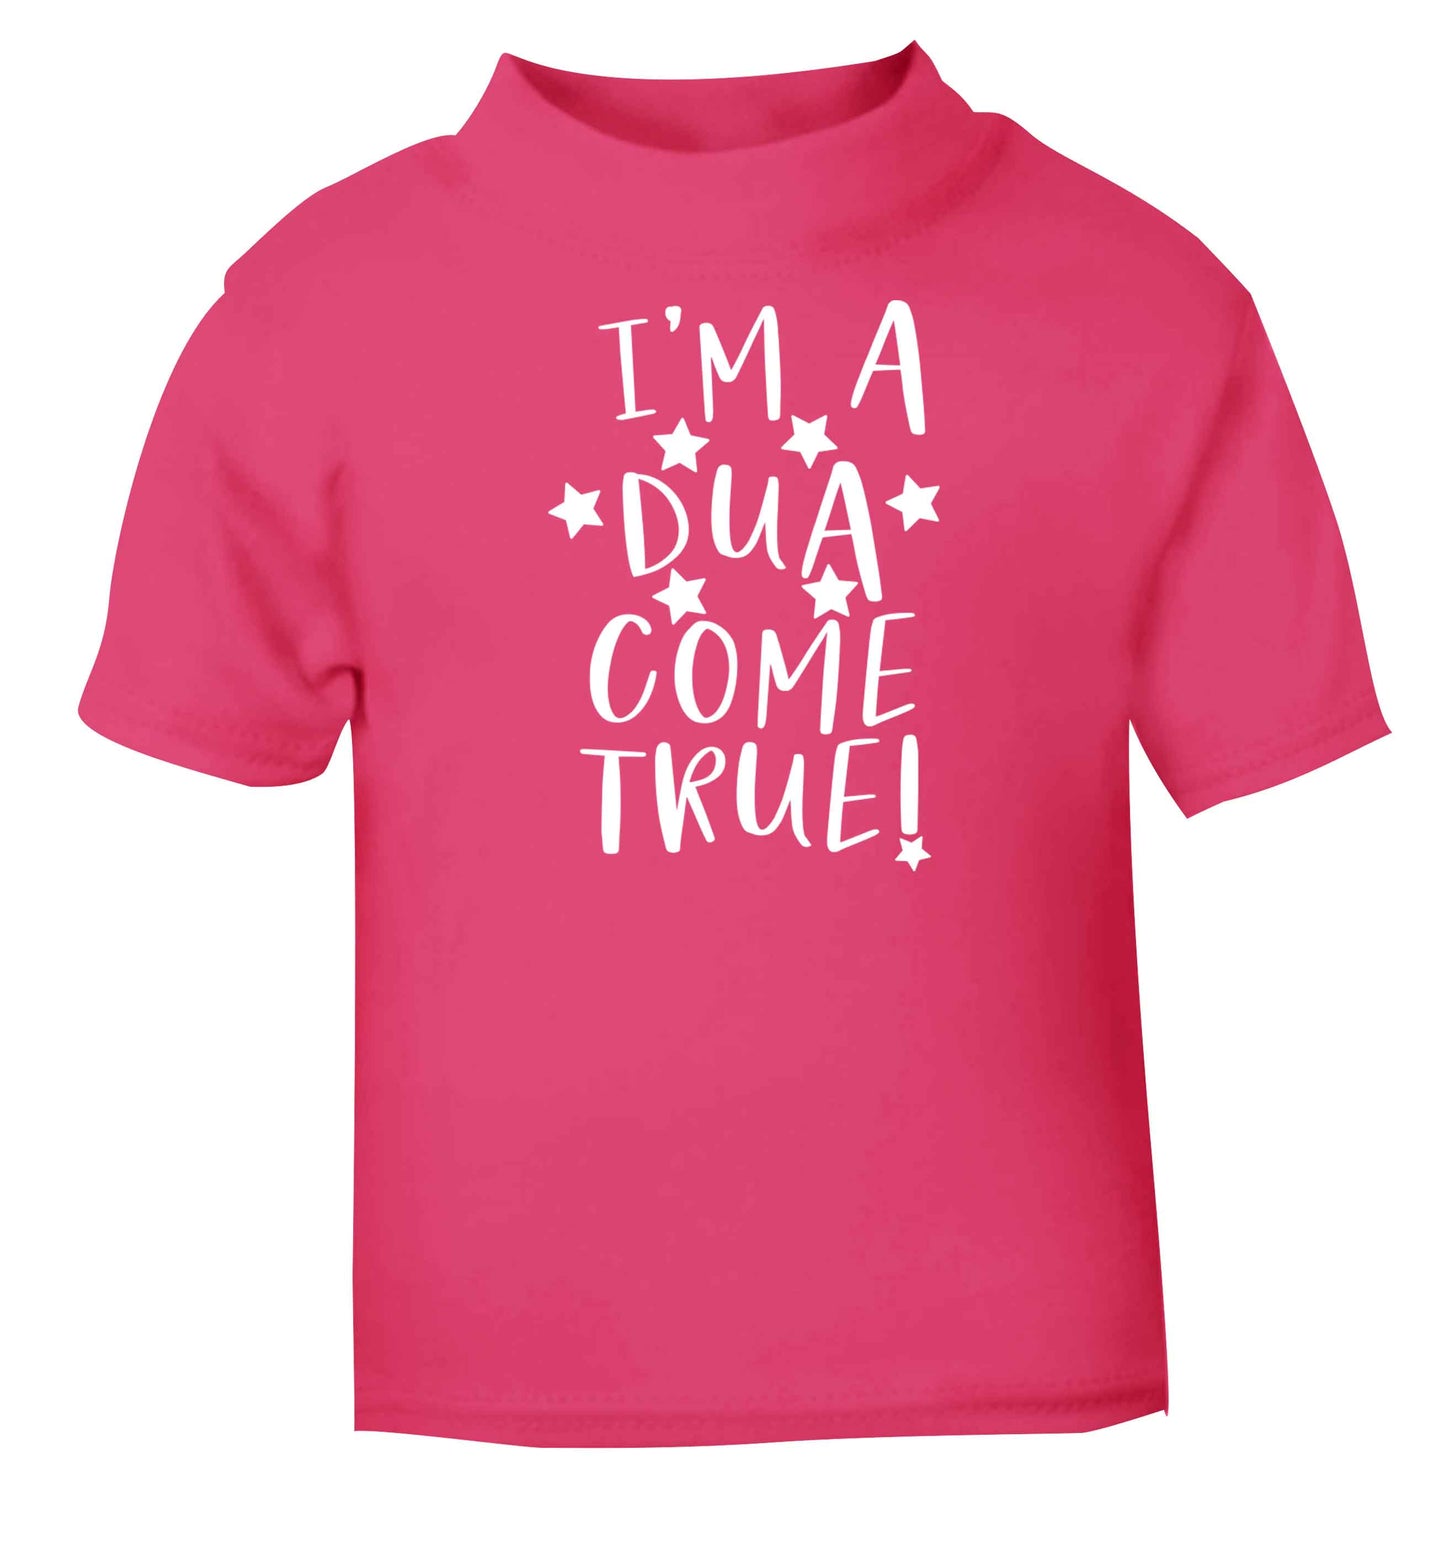 I'm a dua come true pink baby toddler Tshirt 2 Years